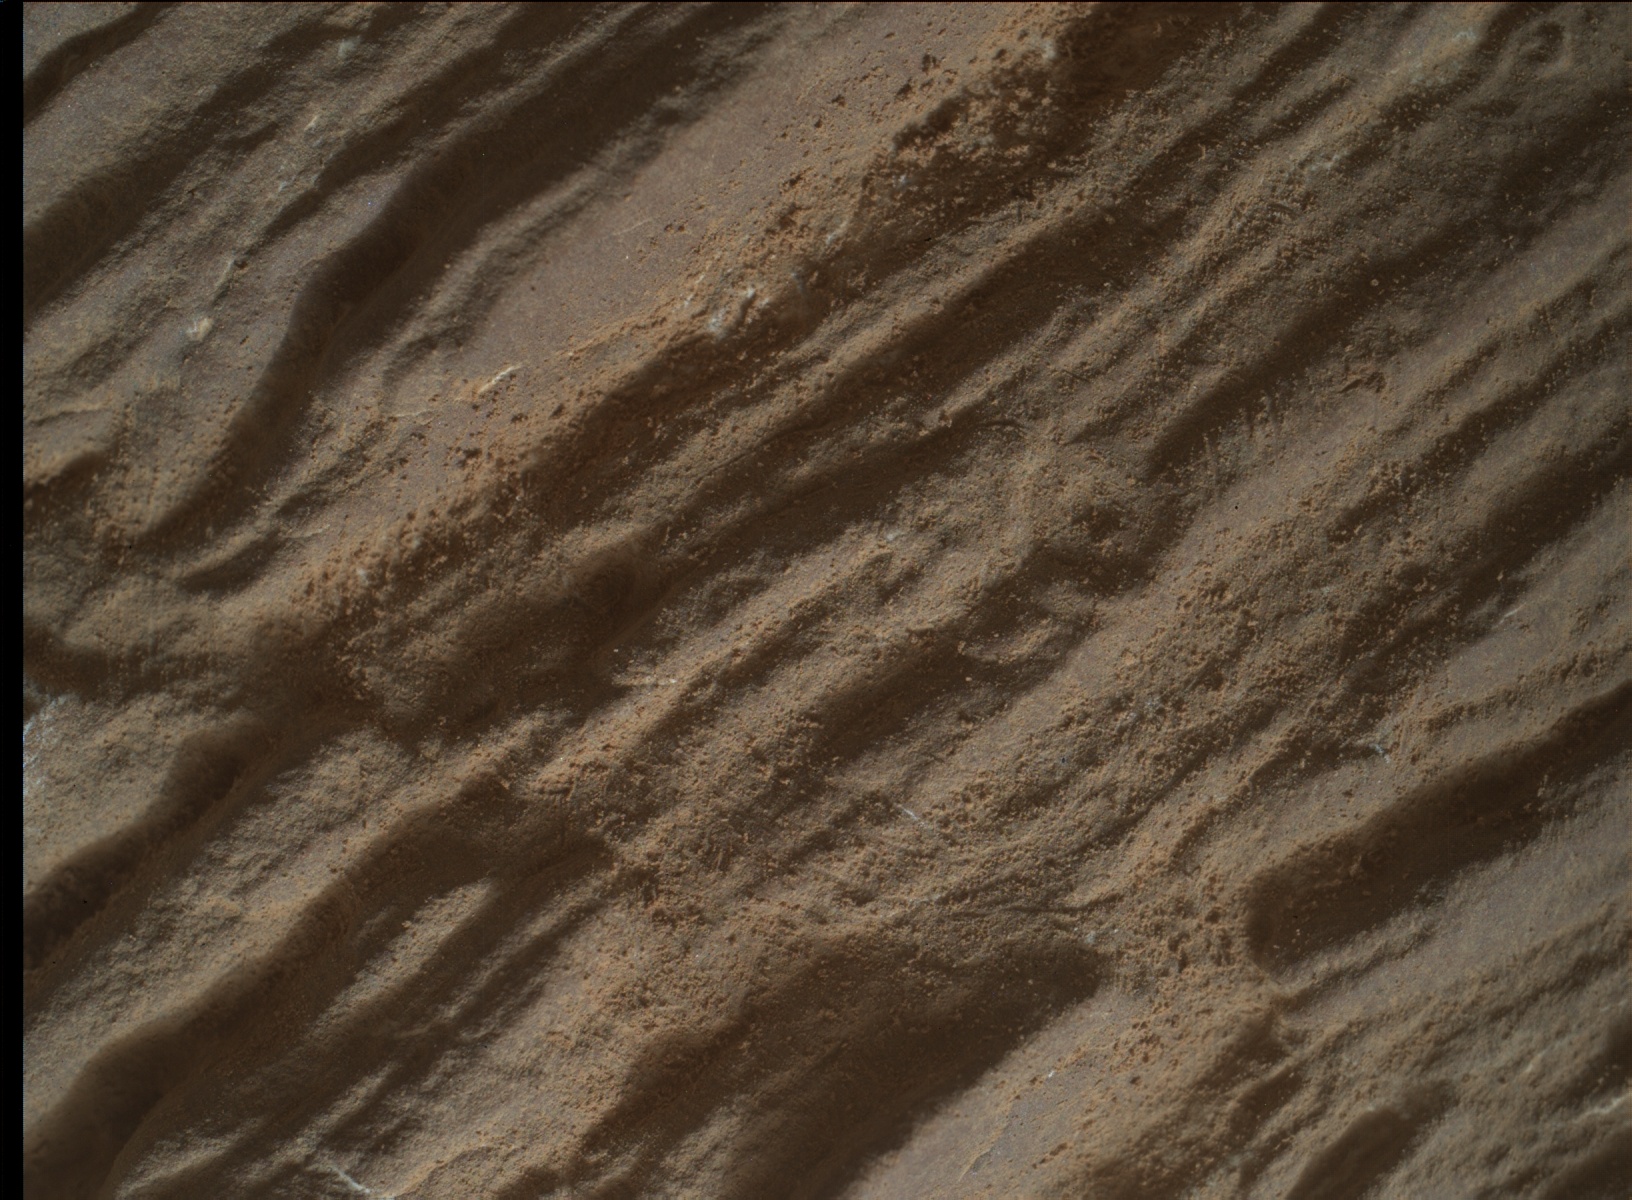 Nasa's Mars rover Curiosity acquired this image using its Mars Hand Lens Imager (MAHLI) on Sol 2470